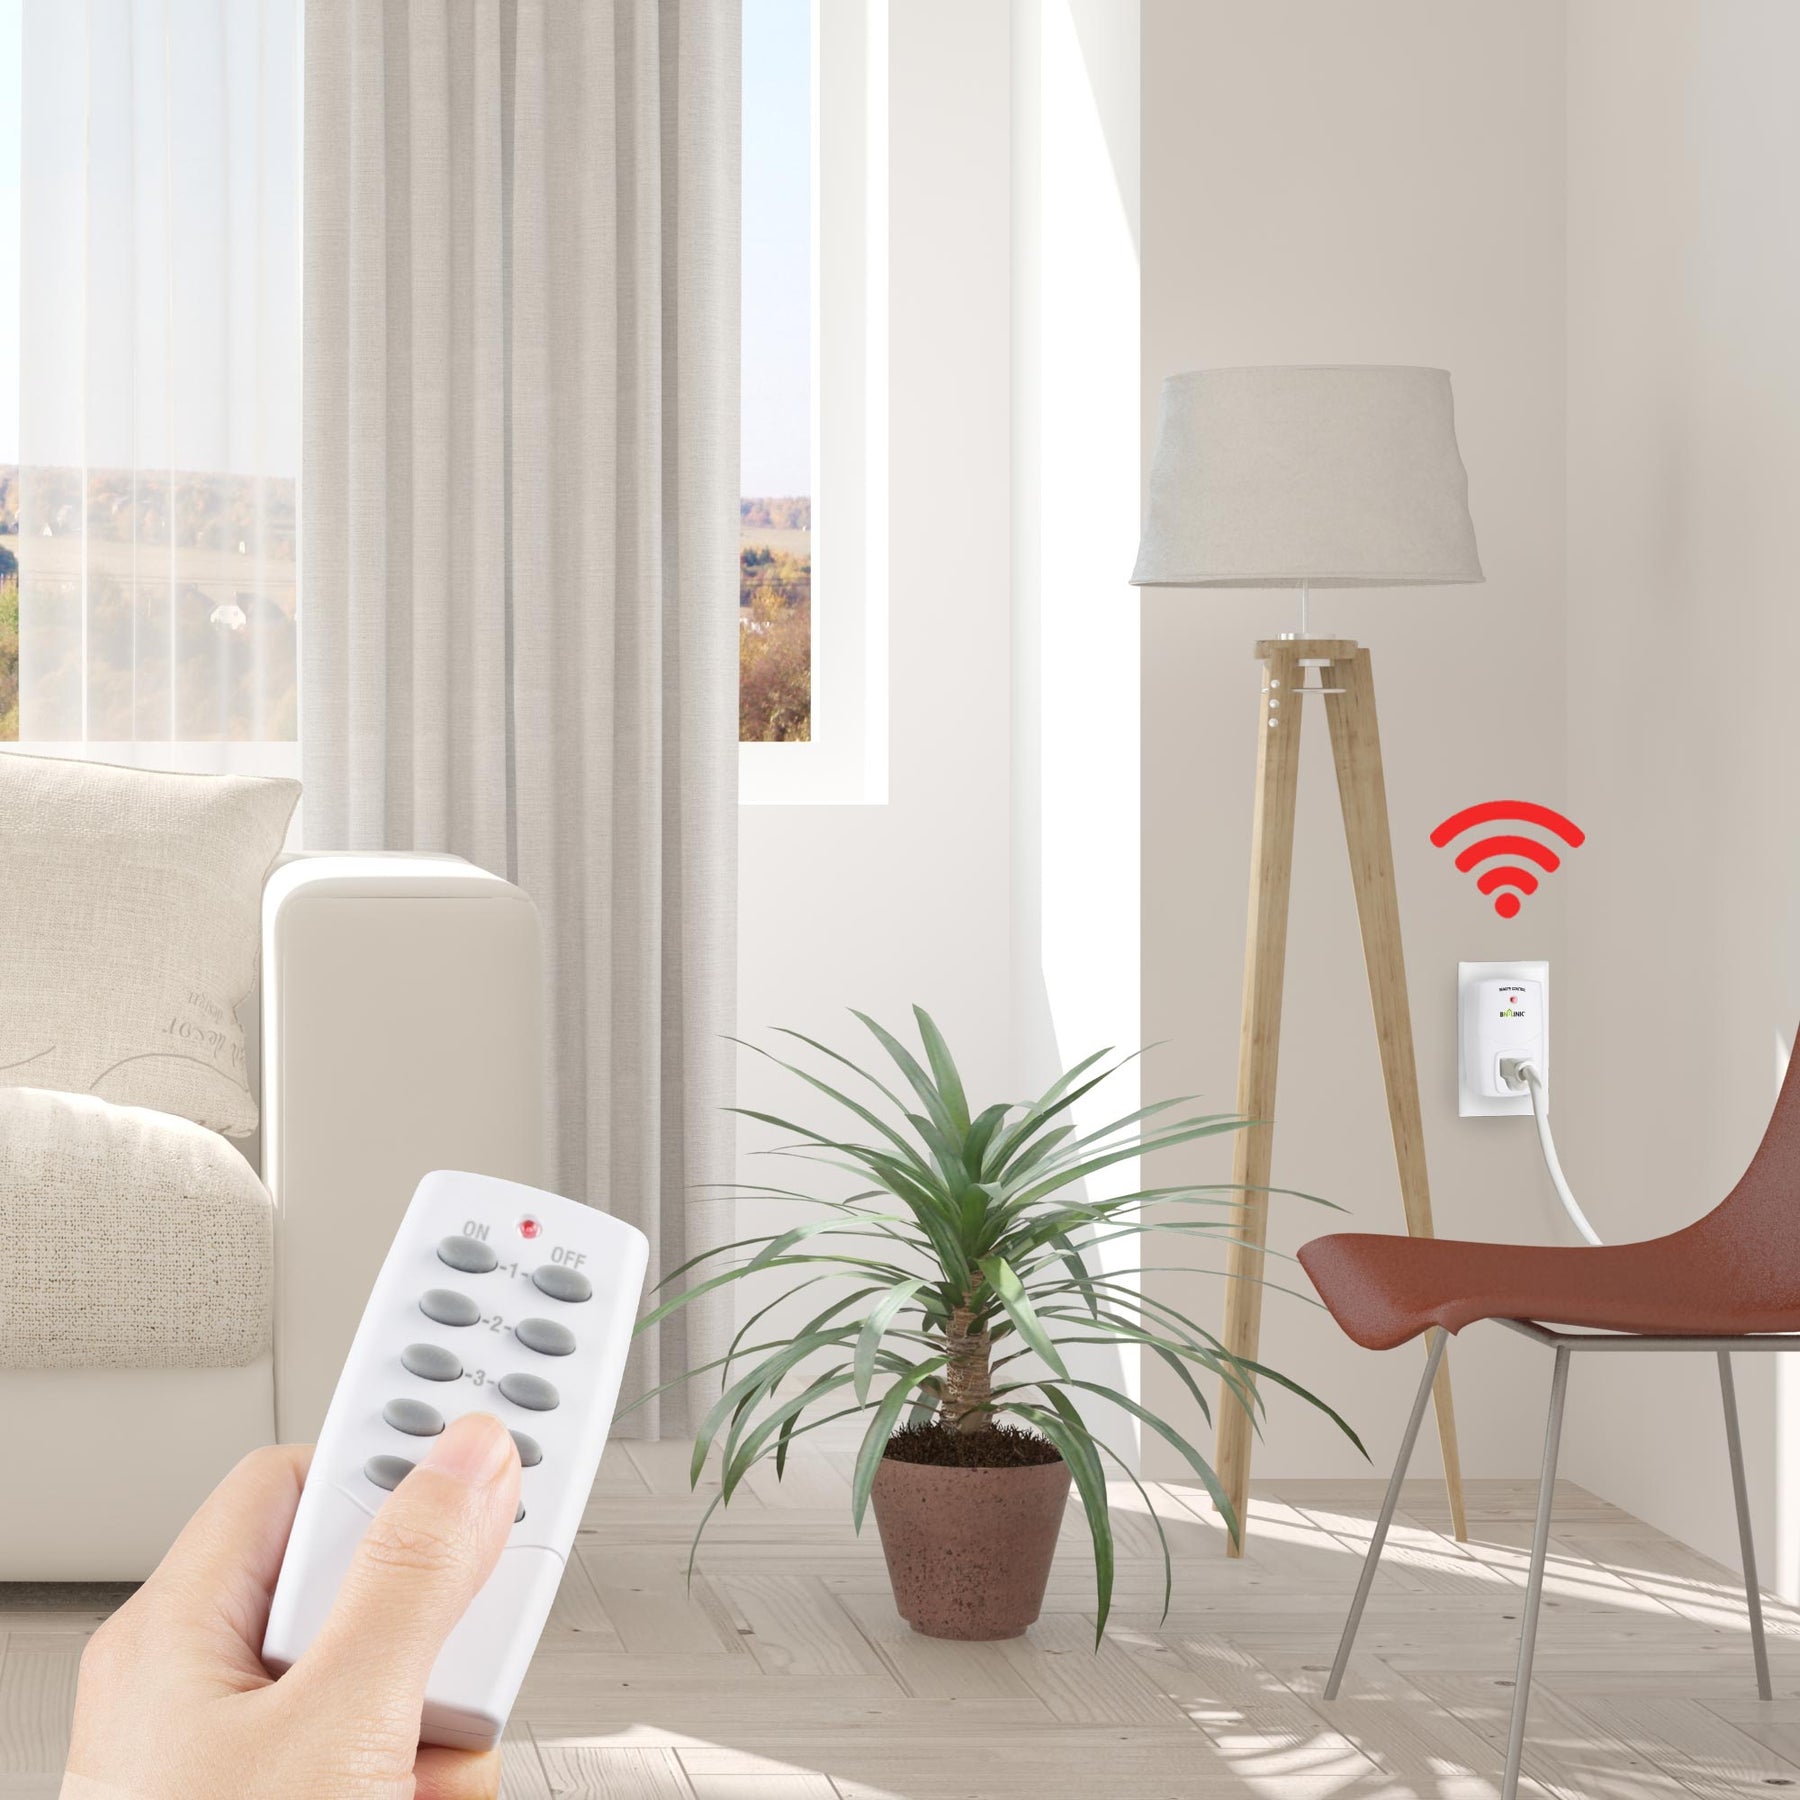 Mini Wireless Wall-Mounting Remote Control Outlet （1 Outlet Only